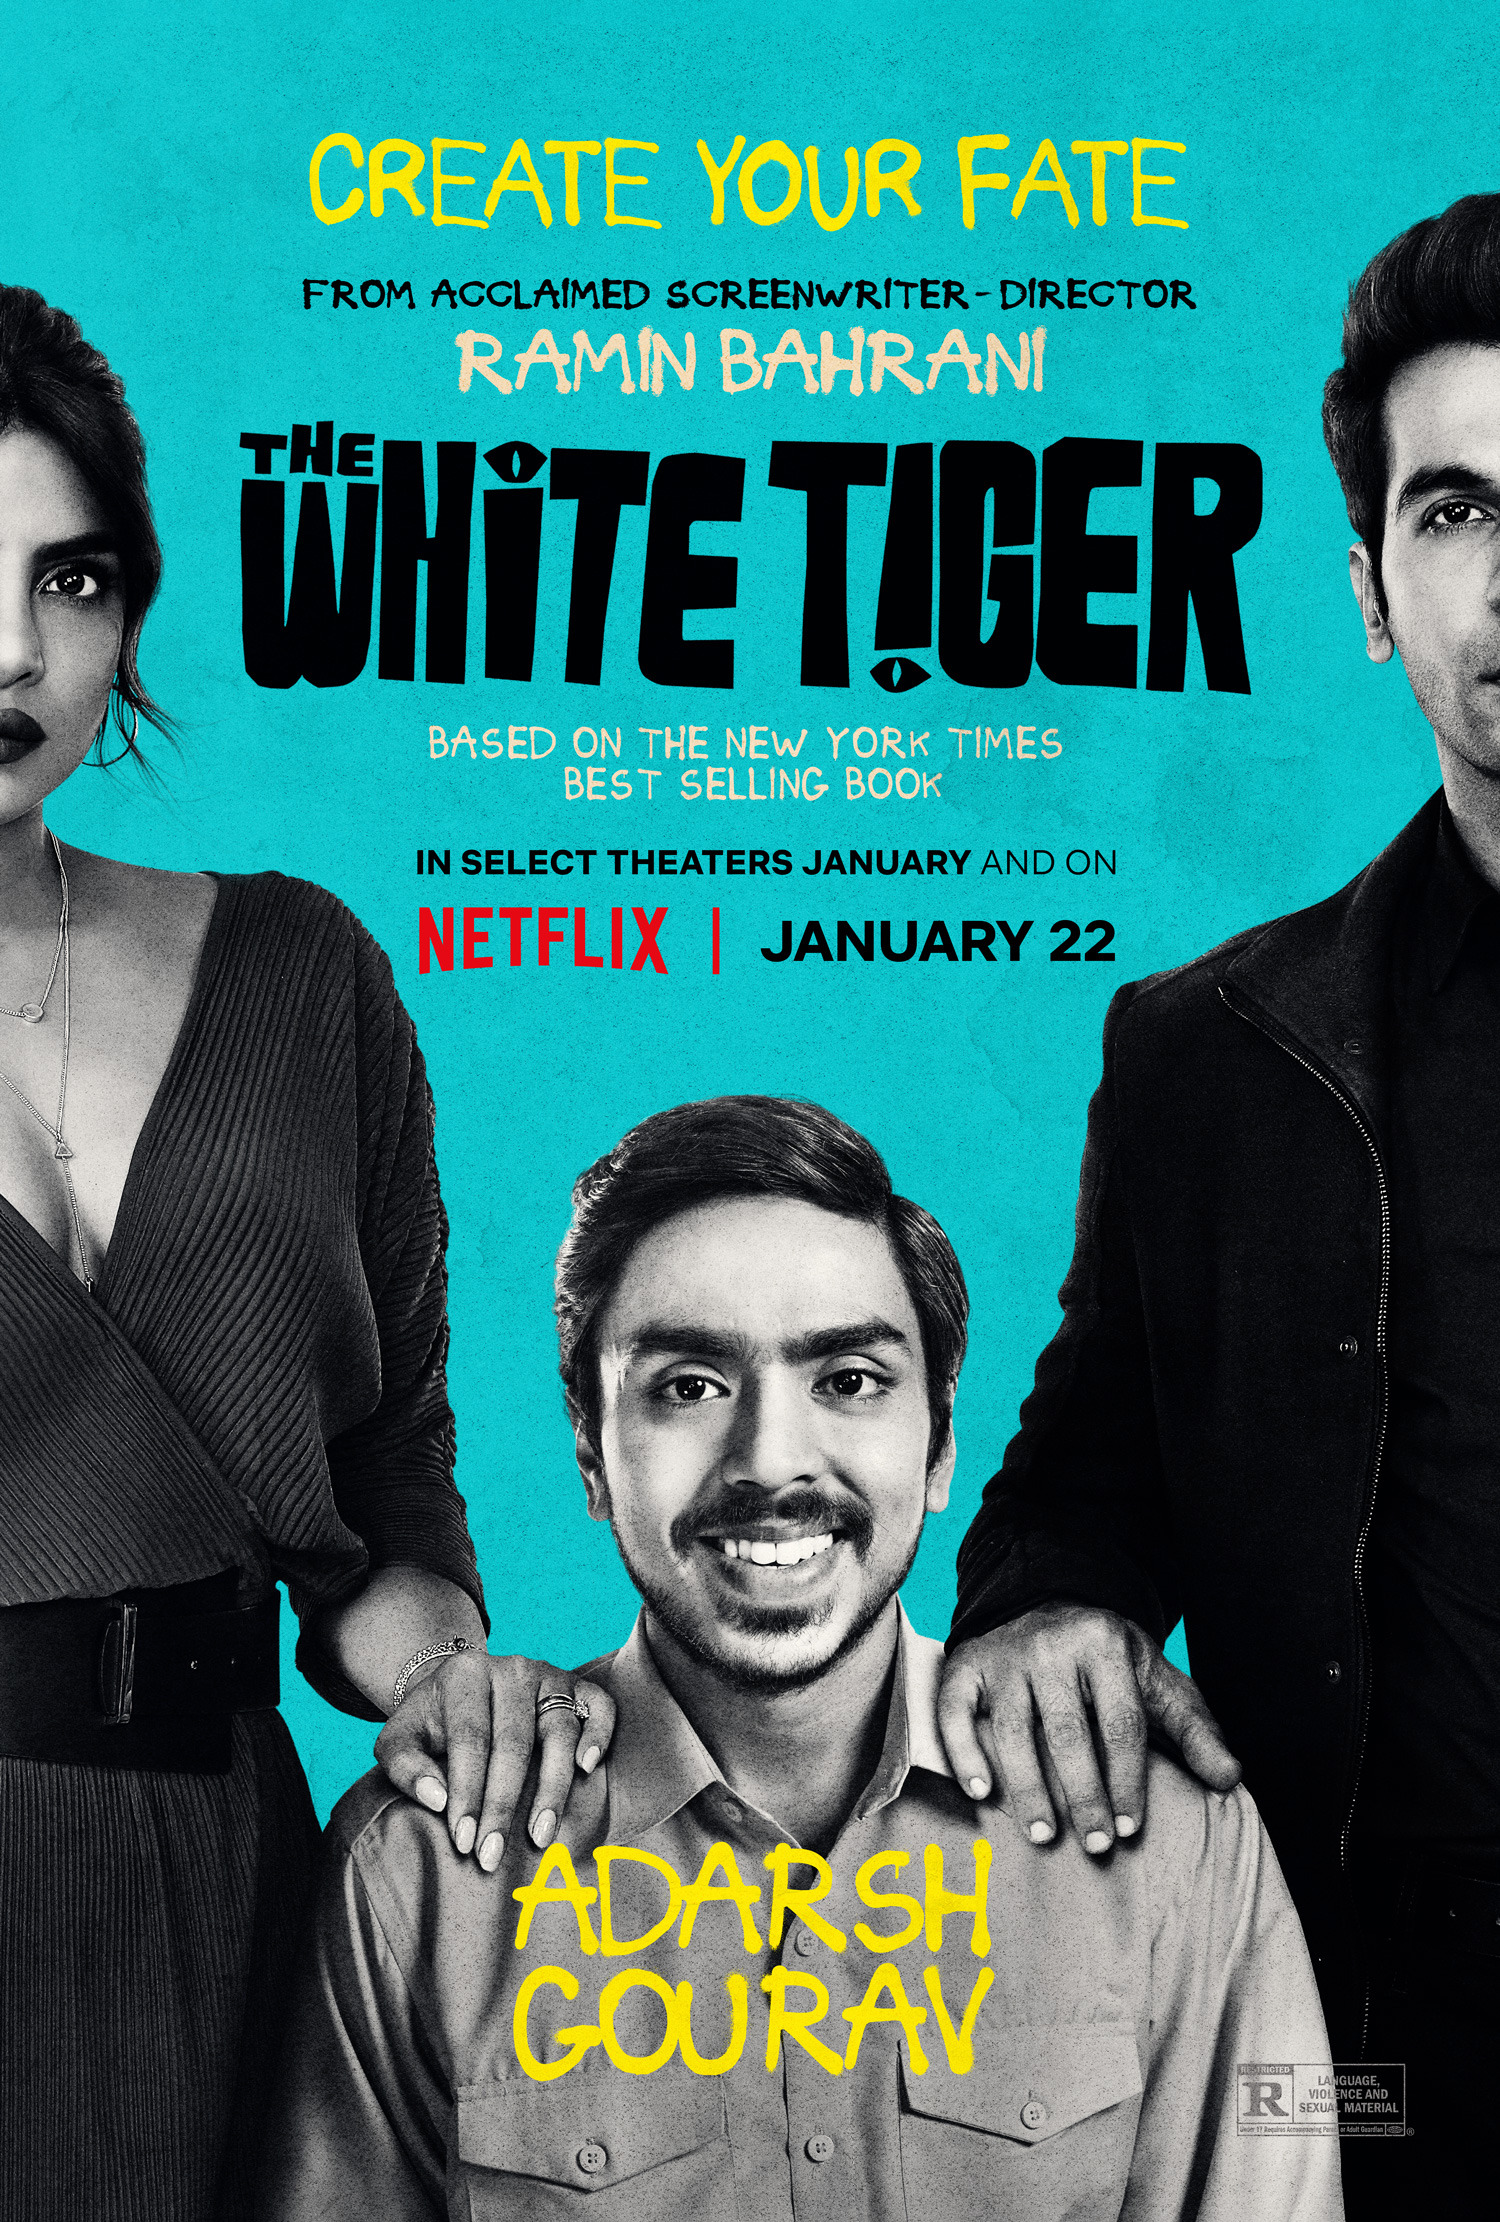 Mega Sized Movie Poster Image for The White Tiger (#4 of 5)